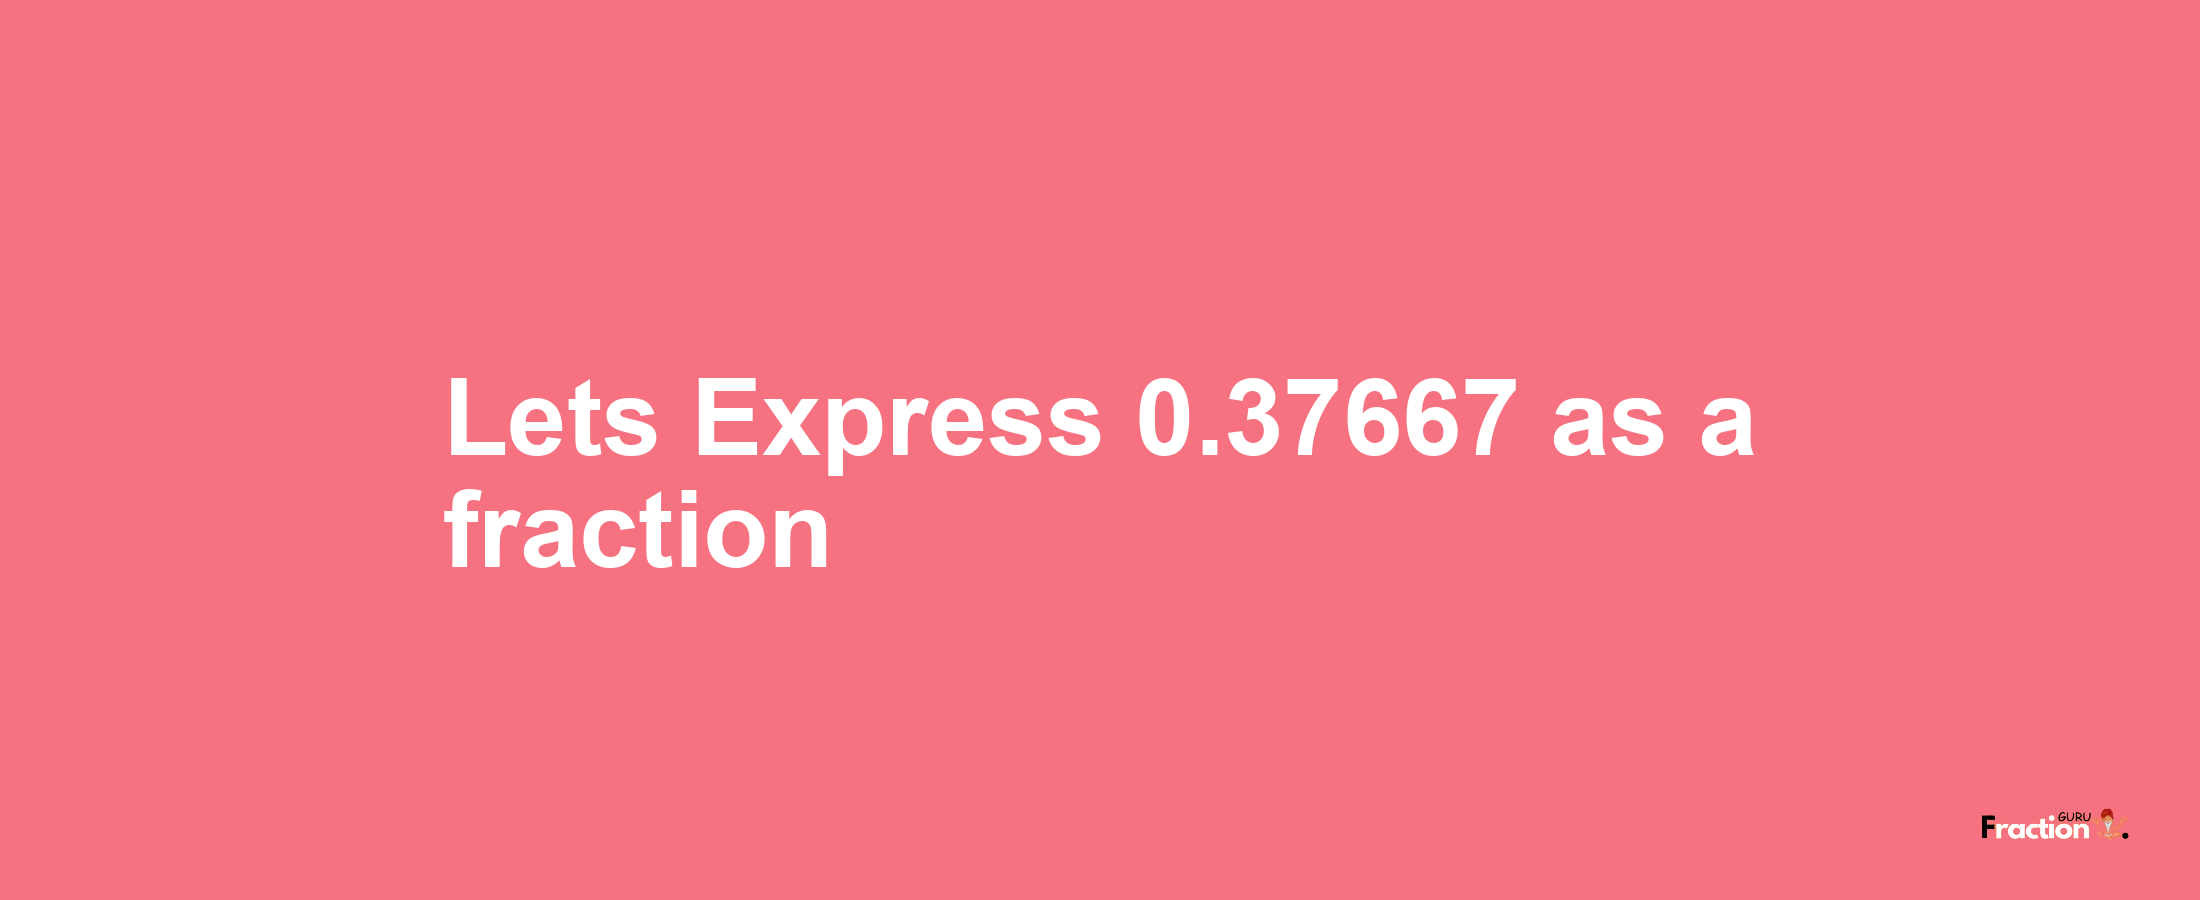 Lets Express 0.37667 as afraction